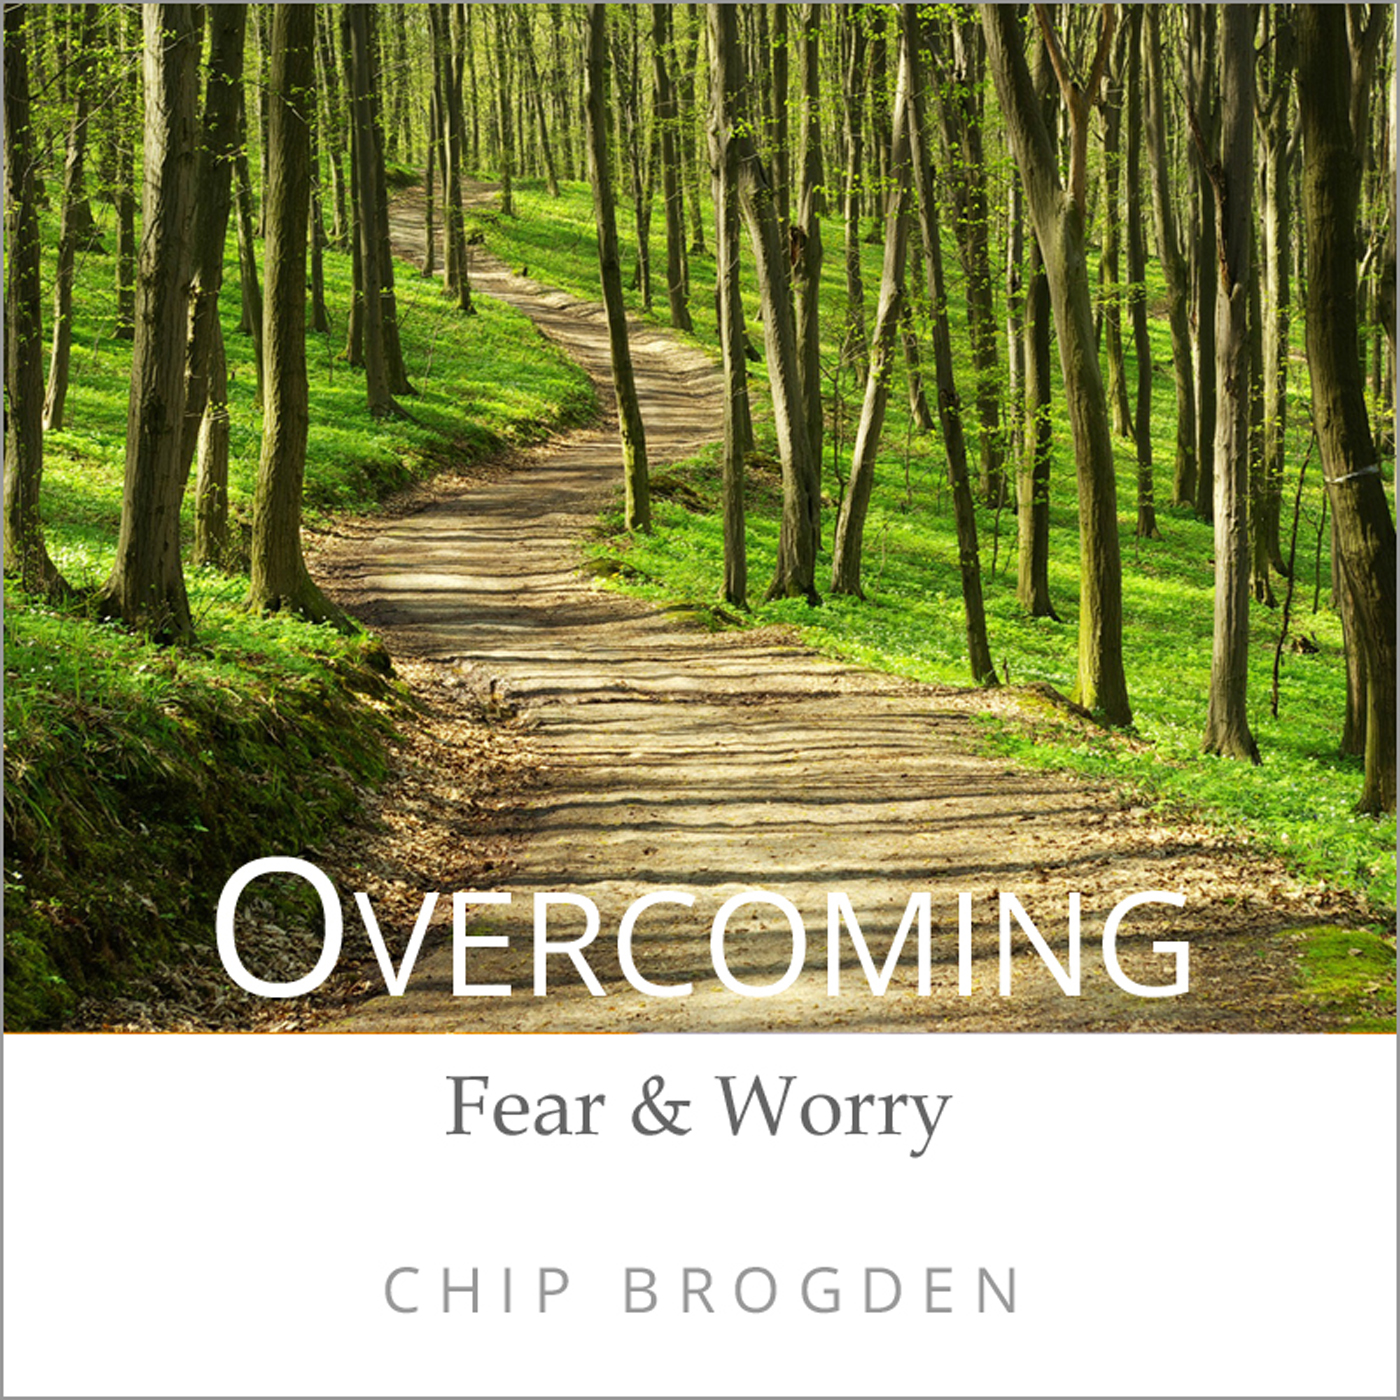 Overcoming Fear and Worry